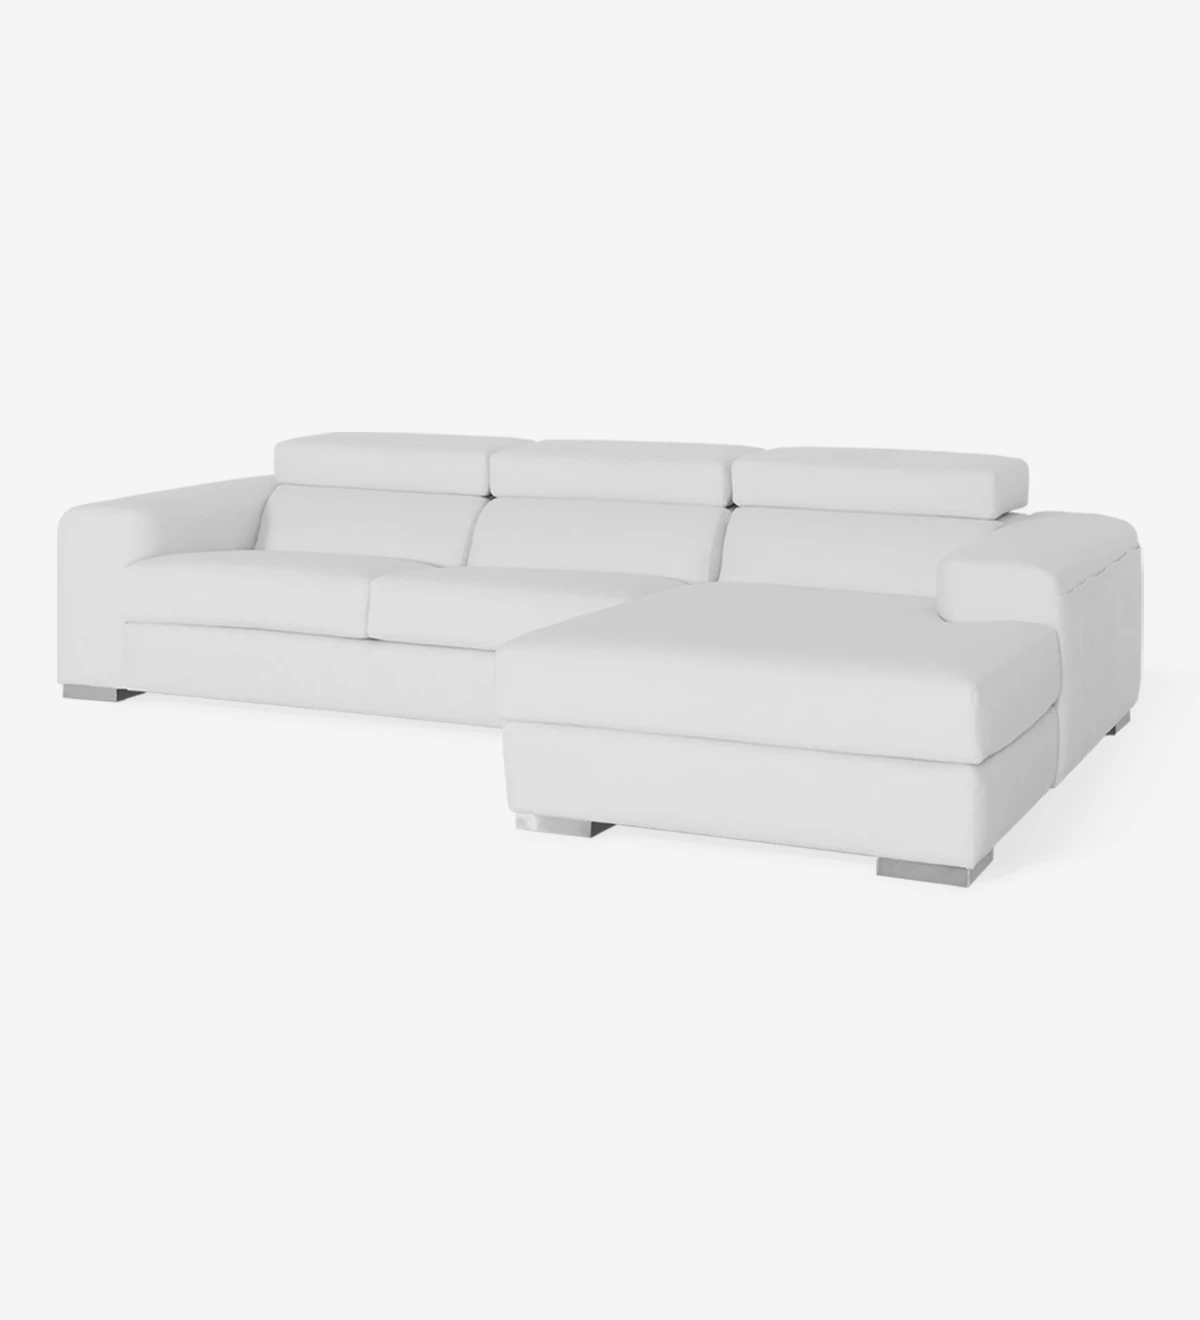 2 seater sofa with chaise longue, upholstered in white eco-leather, with reclining headrests.